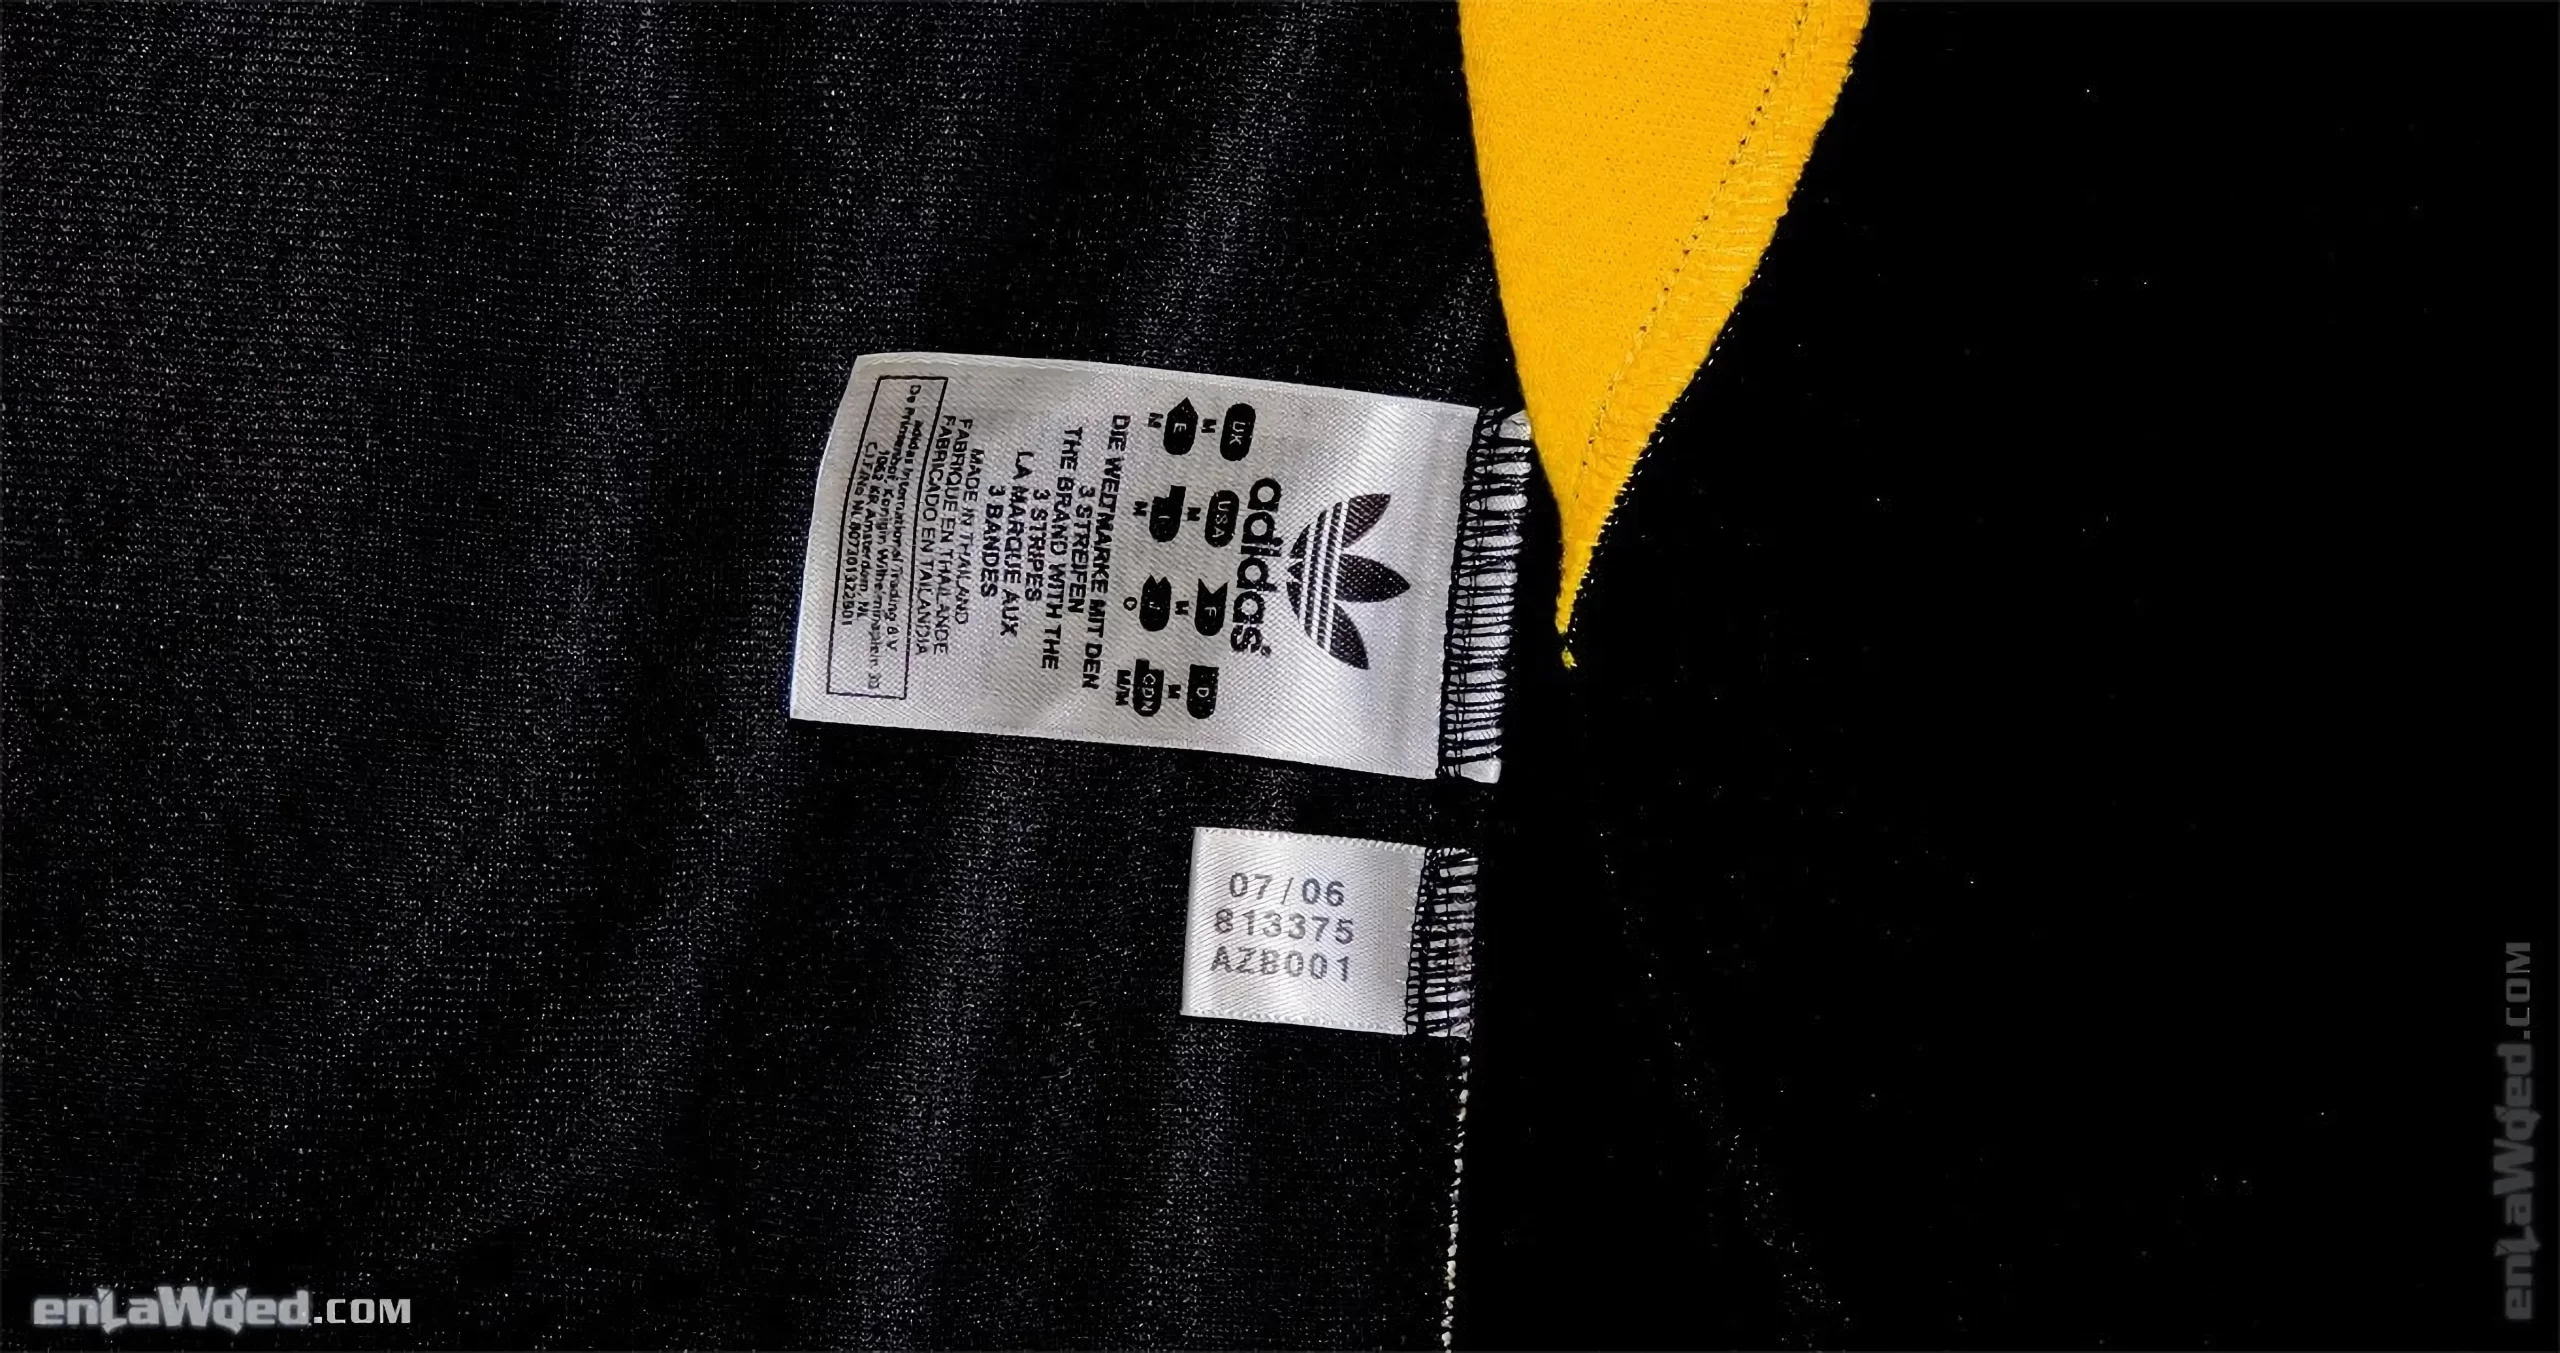 Adidas tag of the Kingston Jamaica jacket, with the month and year of fabrication: 07/2006